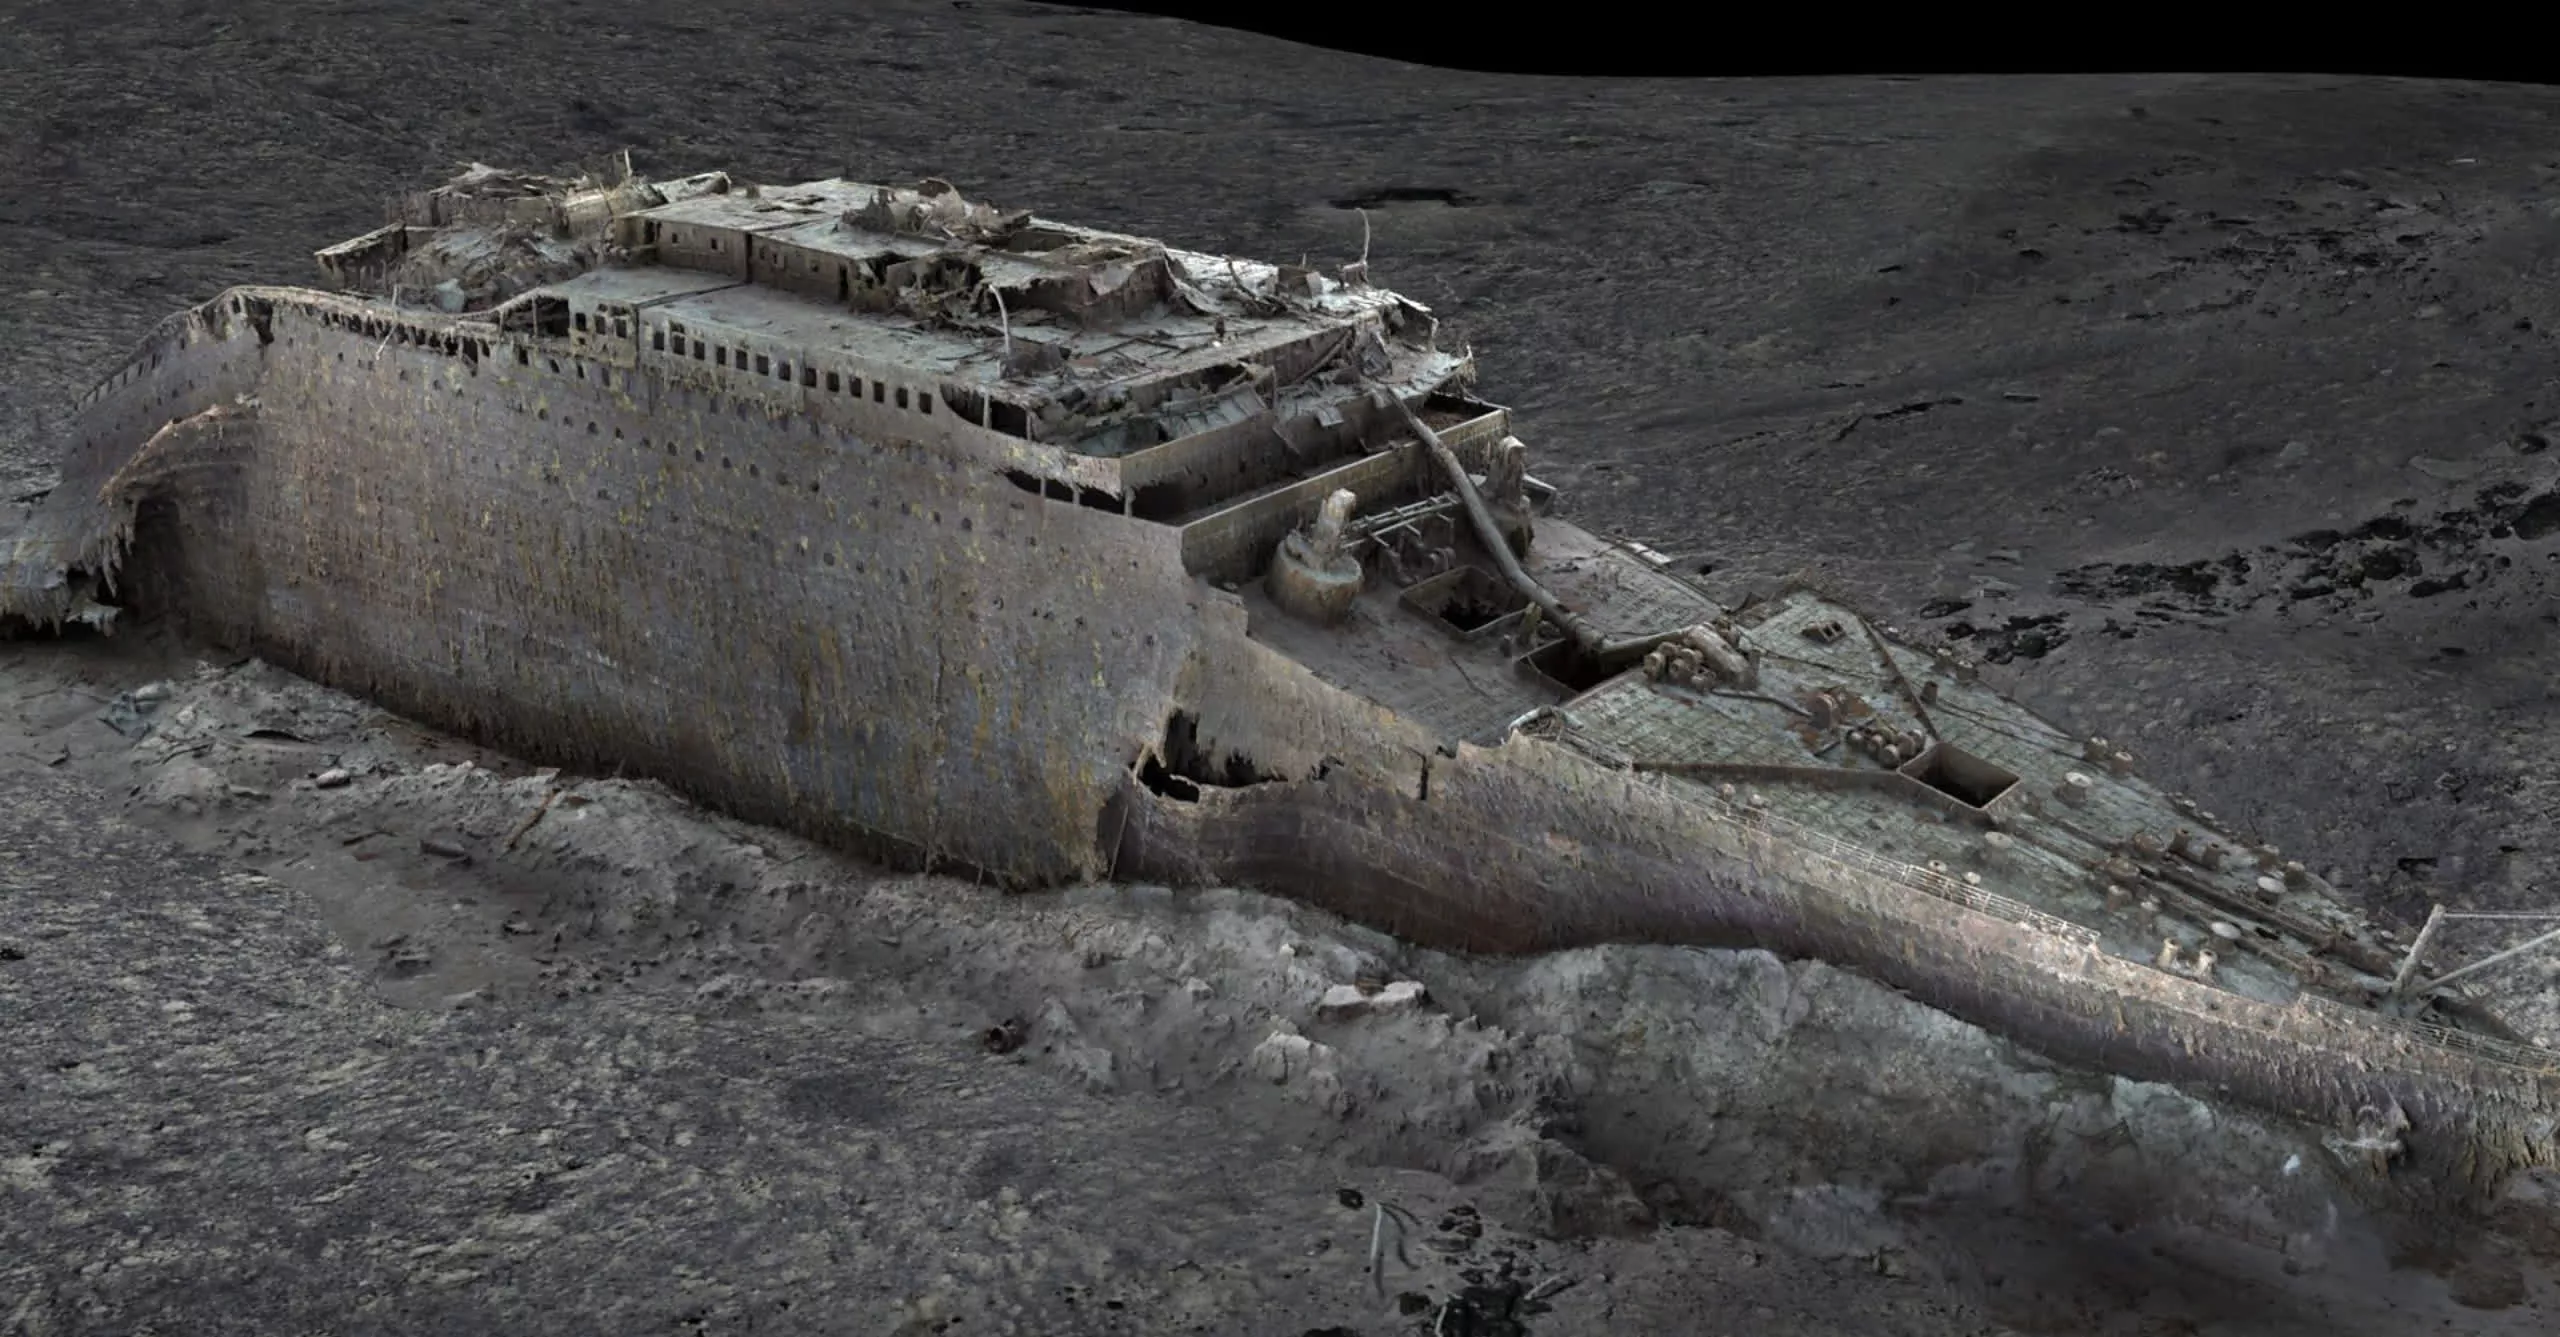 Titanic shipwreck scanned in 3D is a digital twin of the real thing